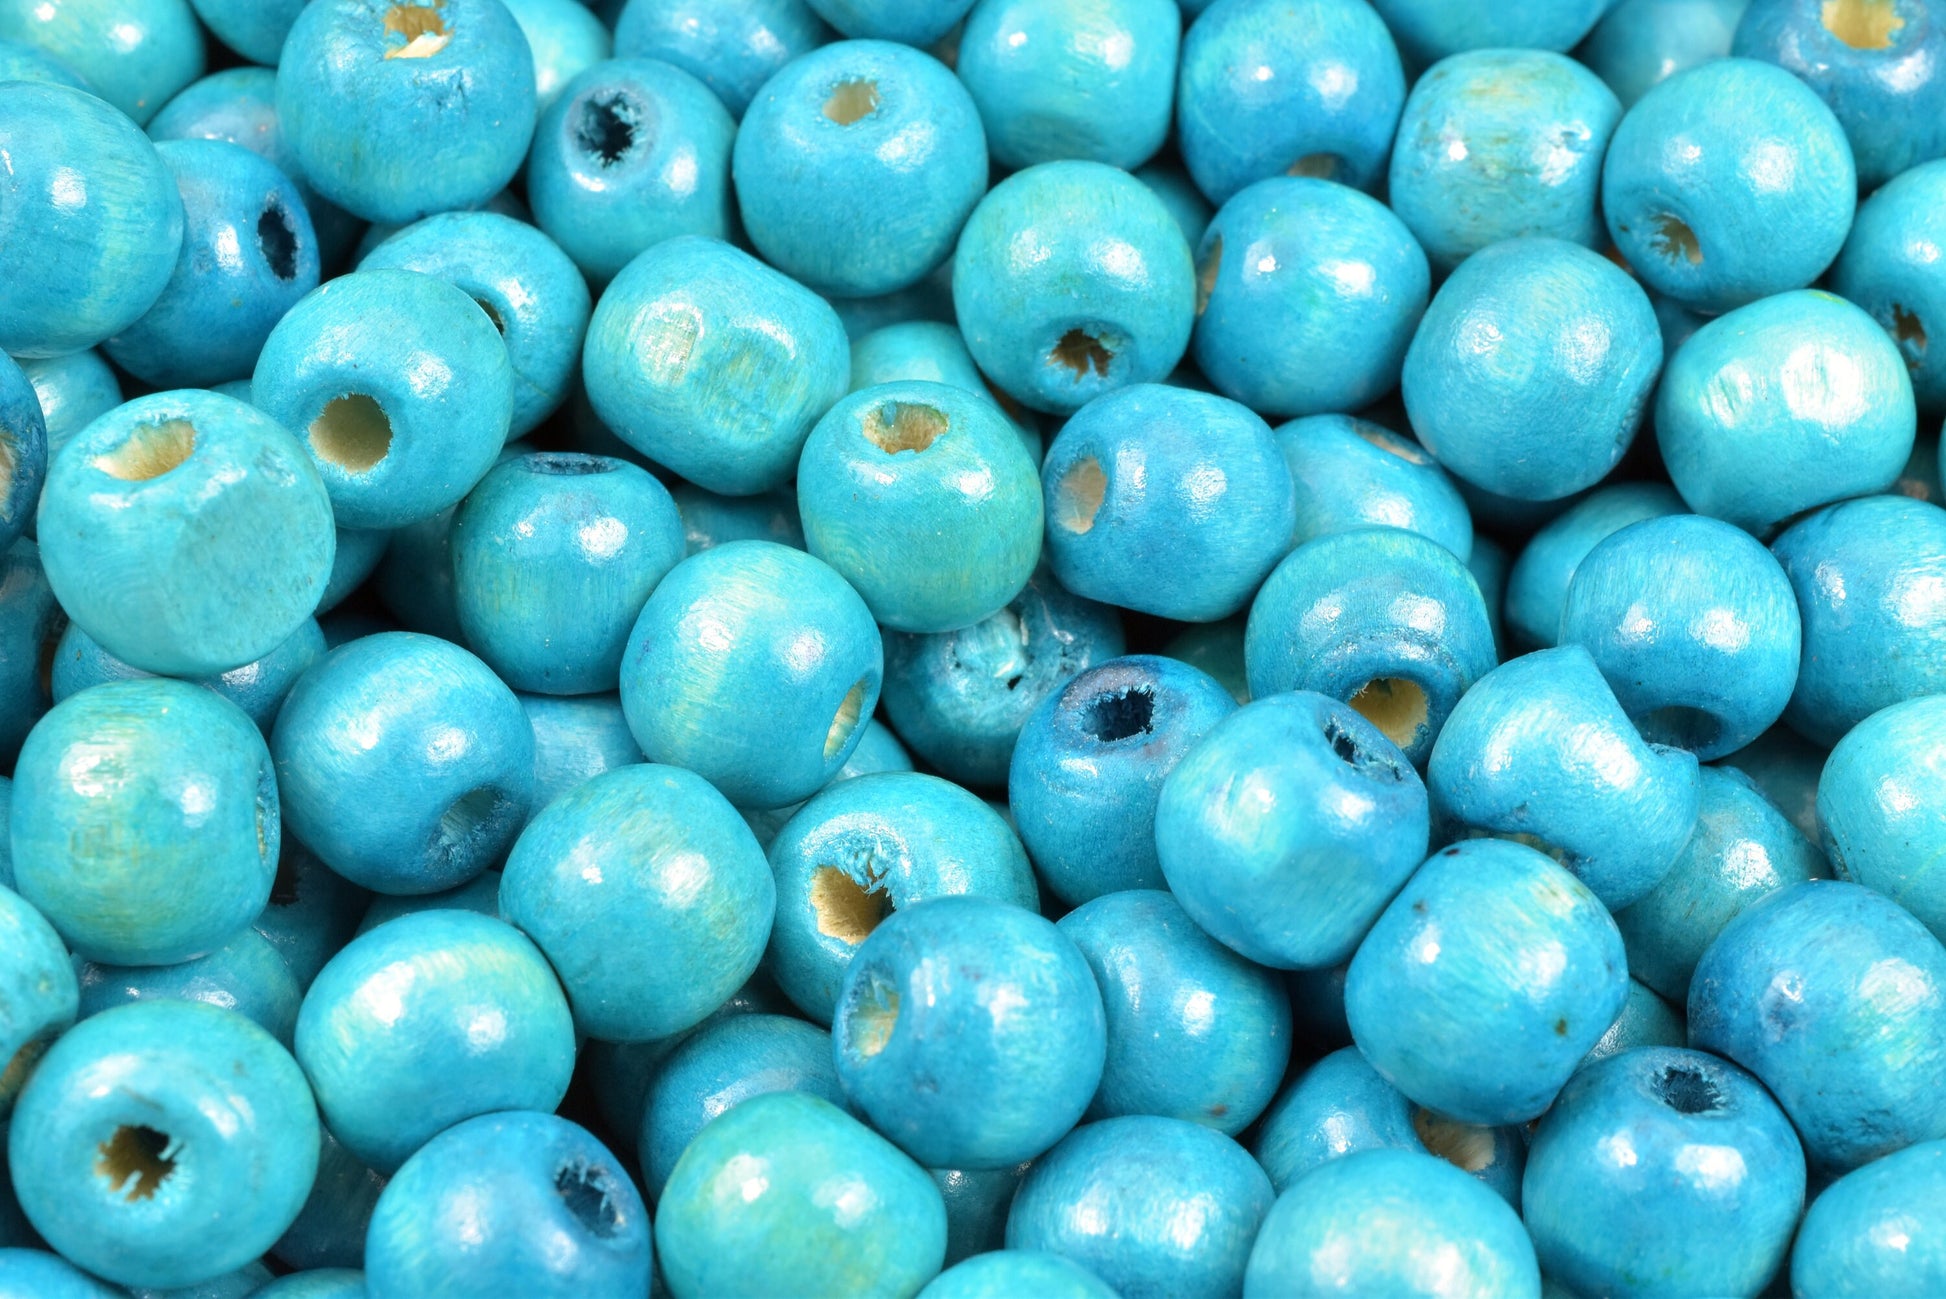 Turquoise Wood Round Beads Sizes 10mm Hole Size 2-3mm, 1300 PCs, (Blue-Green) Finding Parts For Jewelry Making